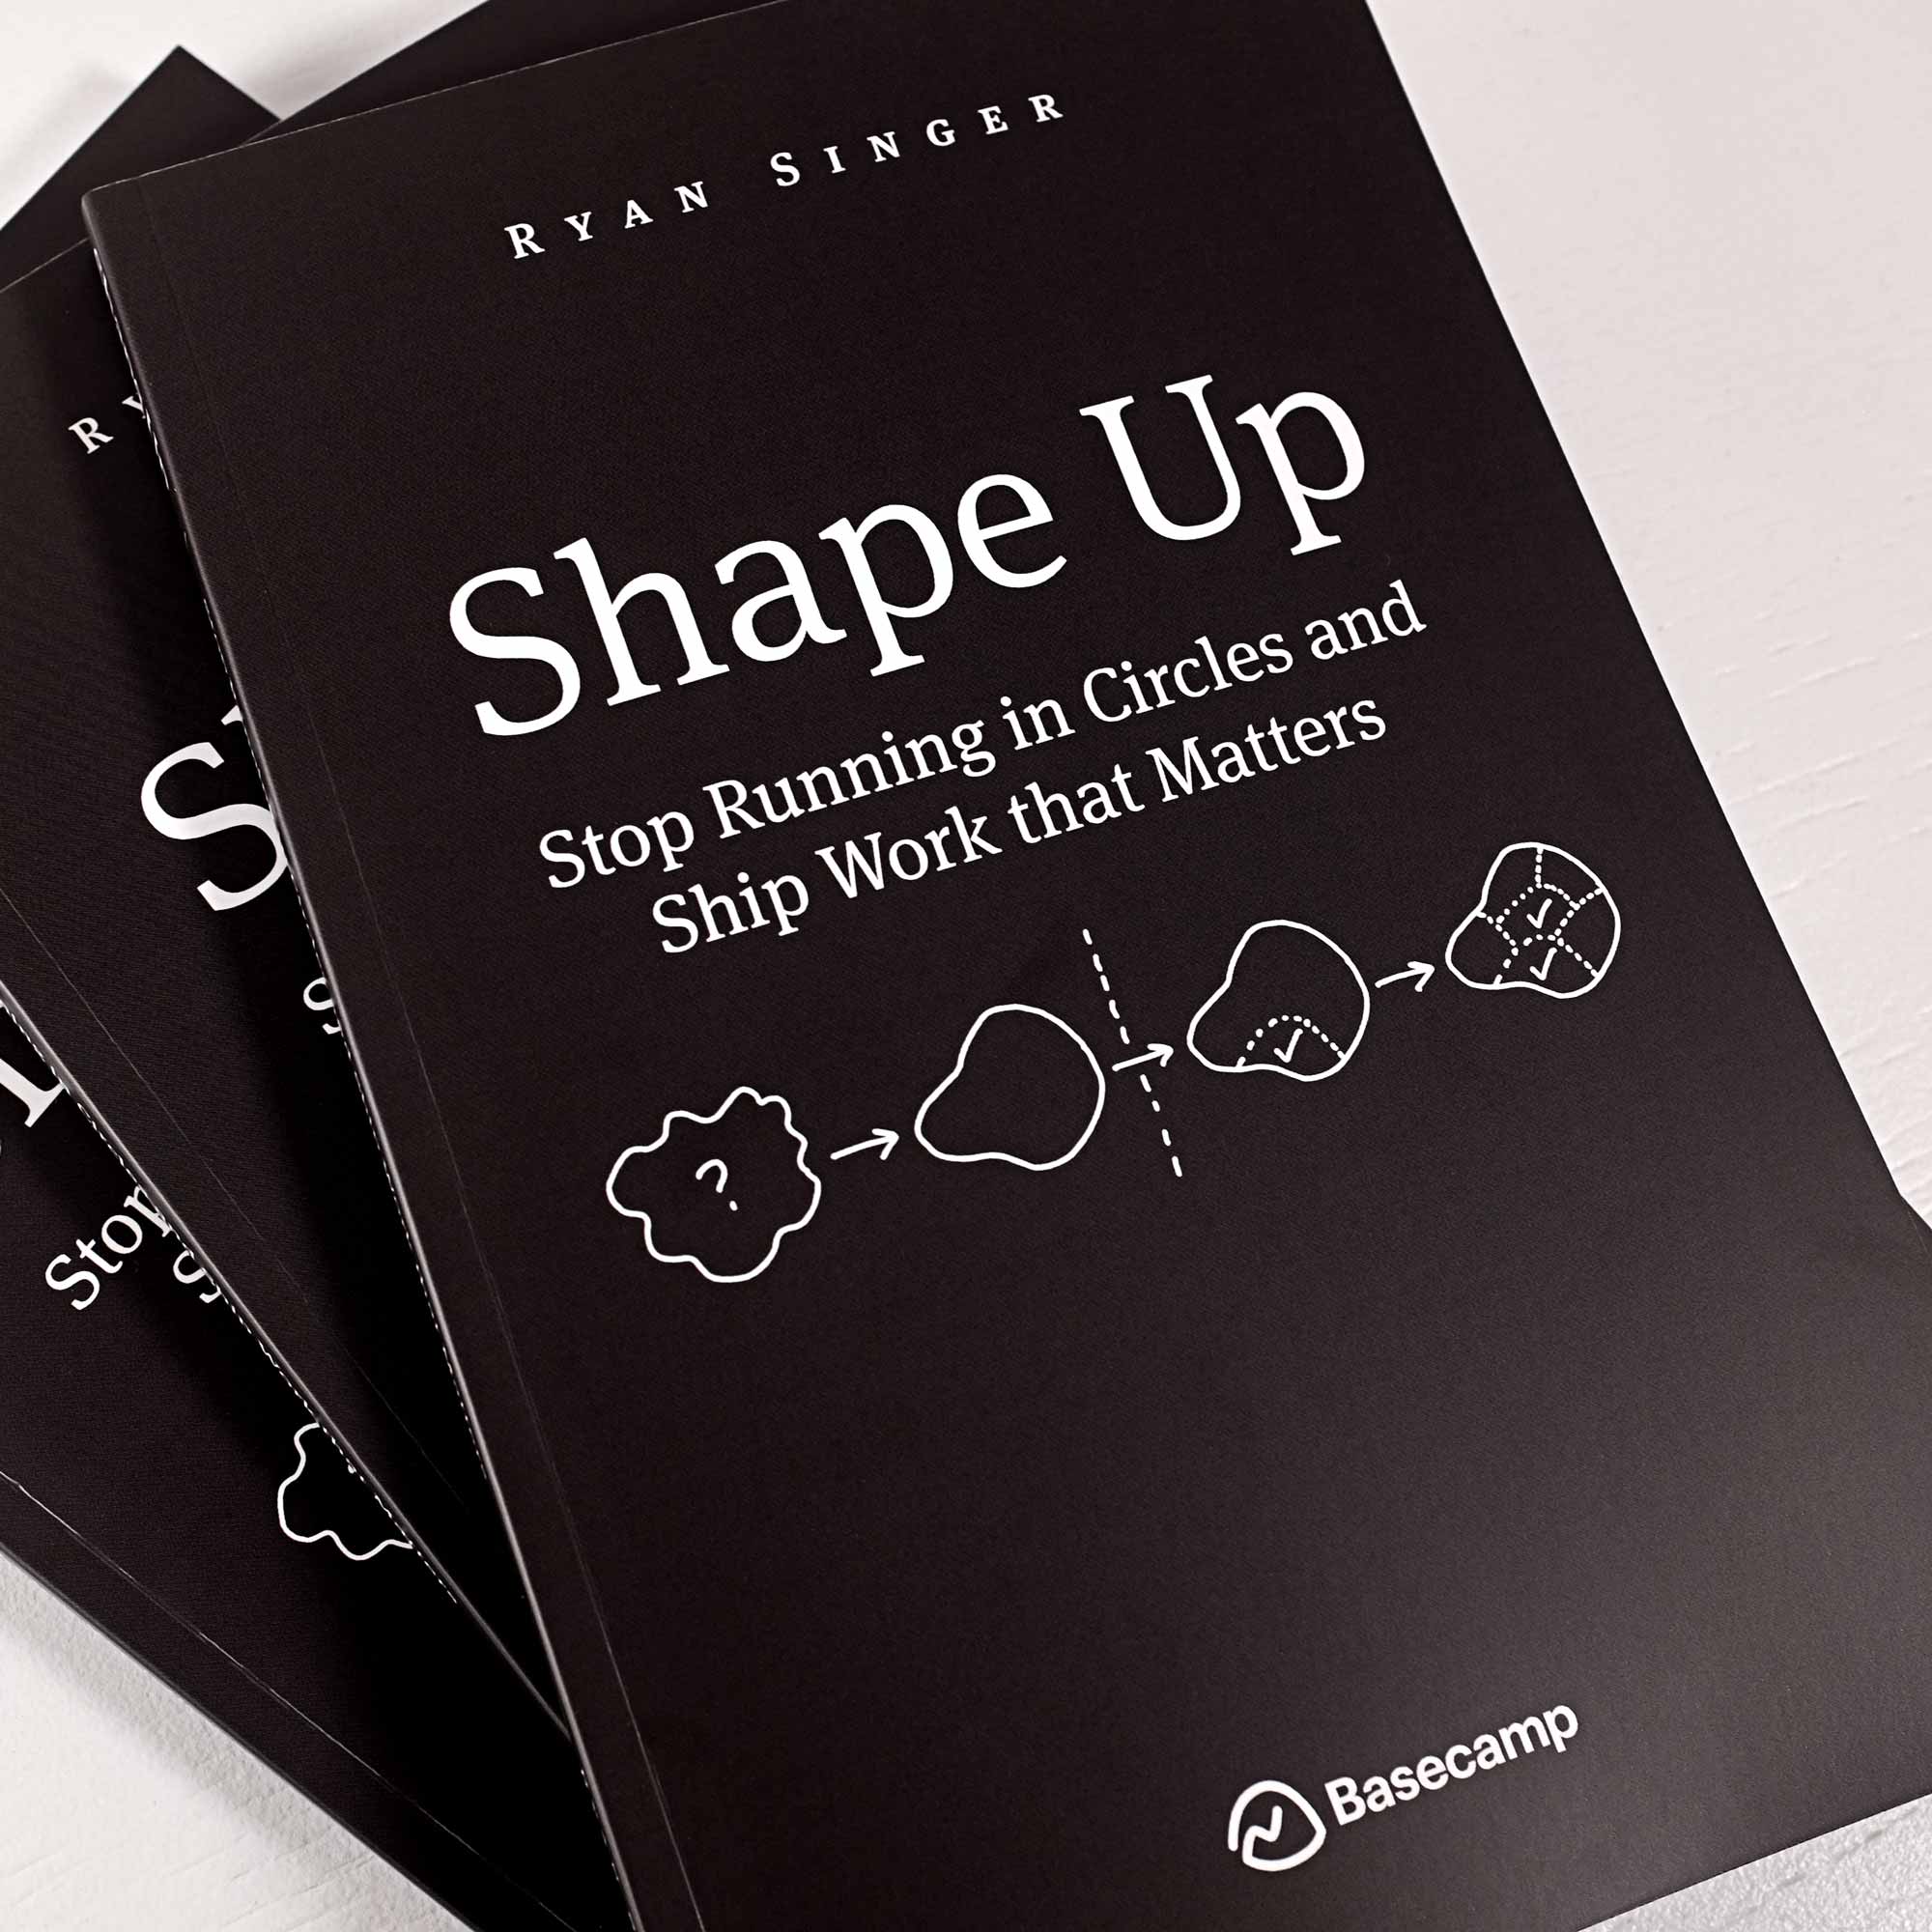 Basecamp: Shape Up — Stop Running in Circles and Ship Work that